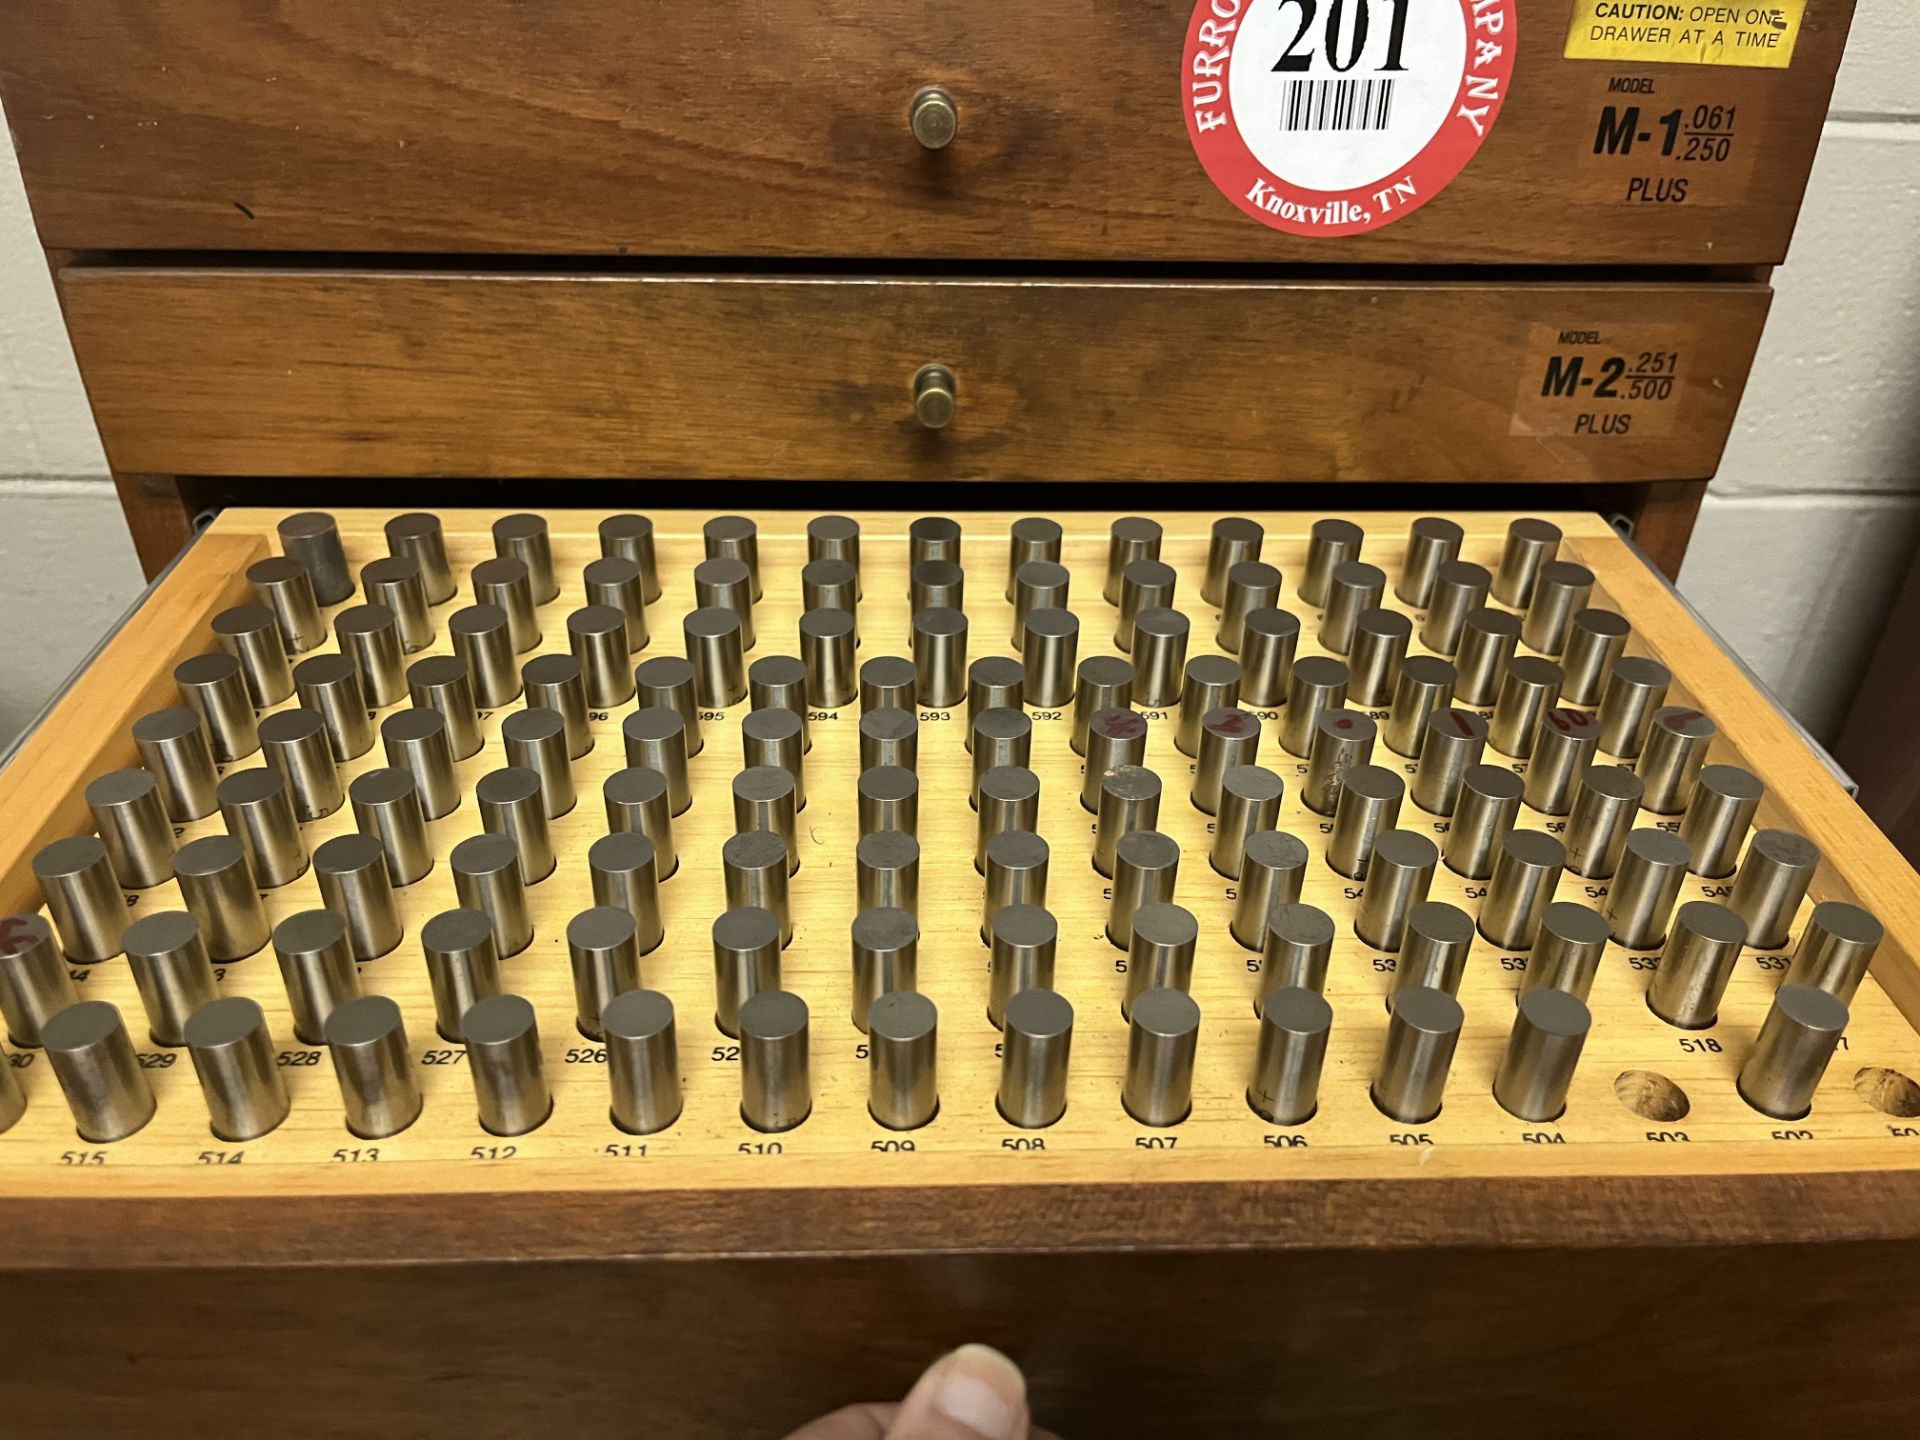 Set of Pin Gauges in 4-Drawer Wooden Cabinet From .051 to .750 - Image 3 of 4